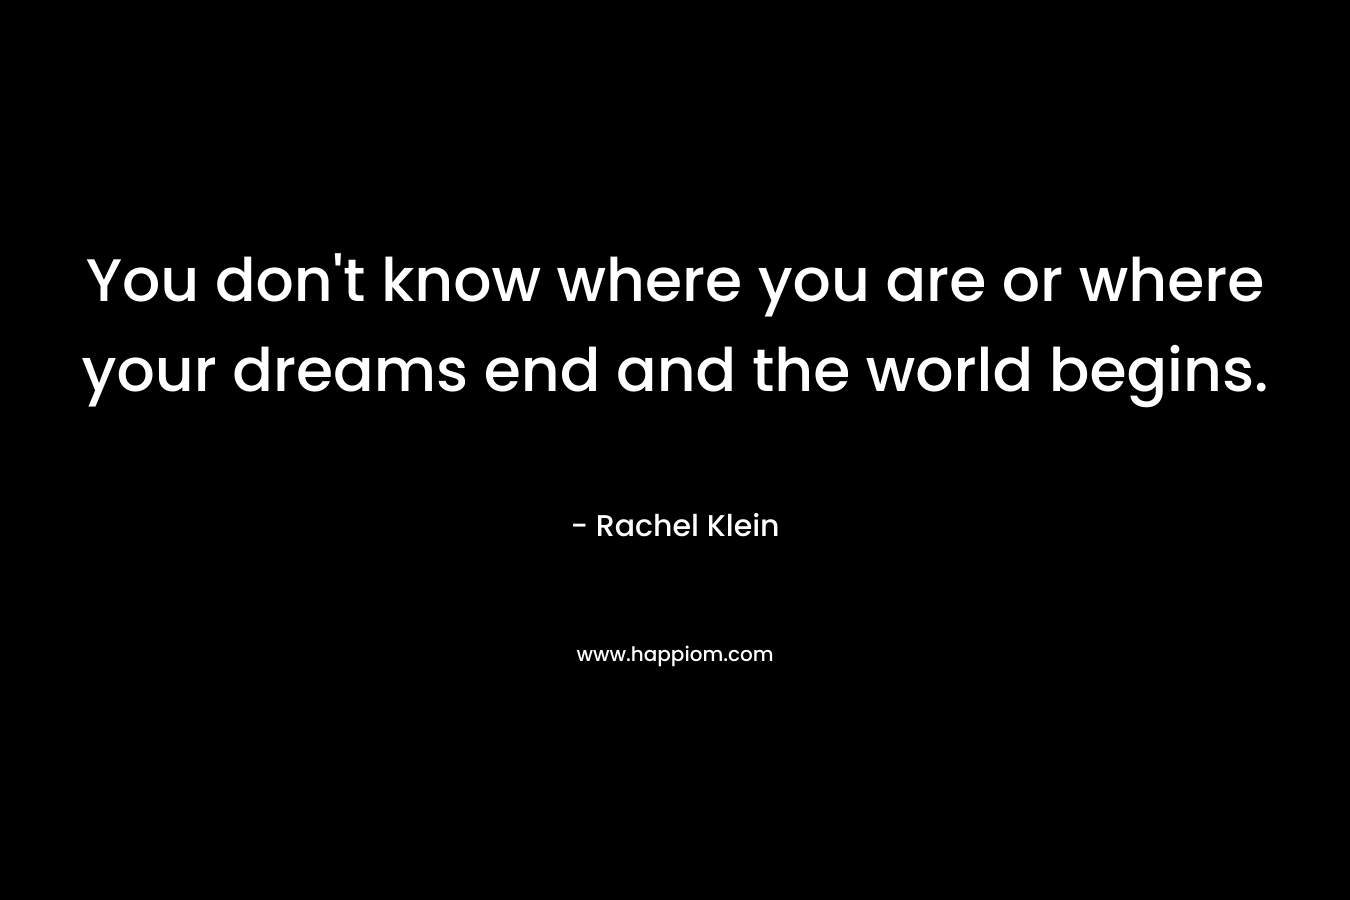 You don't know where you are or where your dreams end and the world begins.